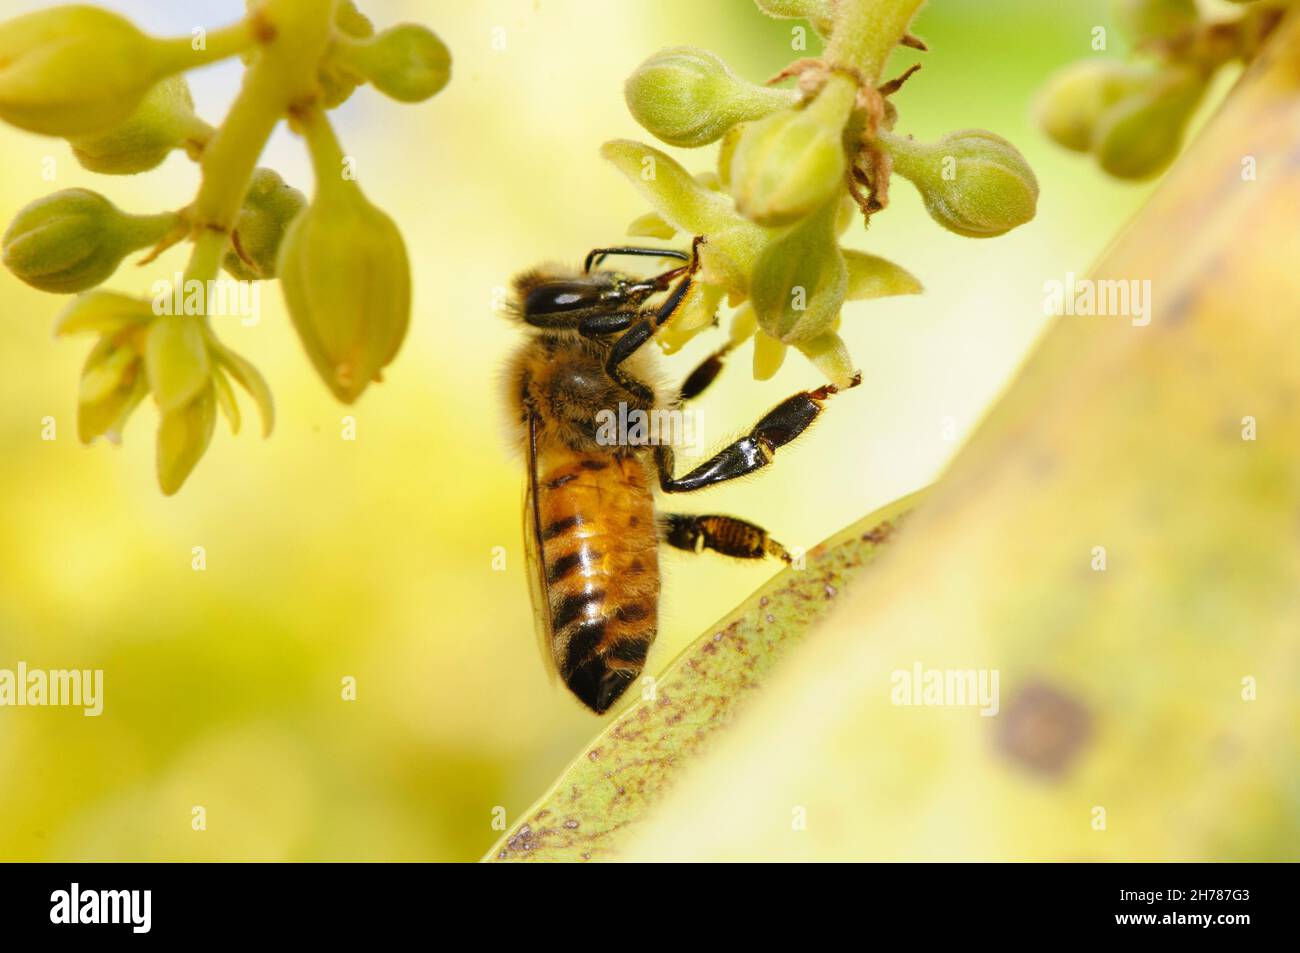 Honey bee collects nectar from blossoms in an avocado Plantation. Photographed in Israel in March Stock Photo